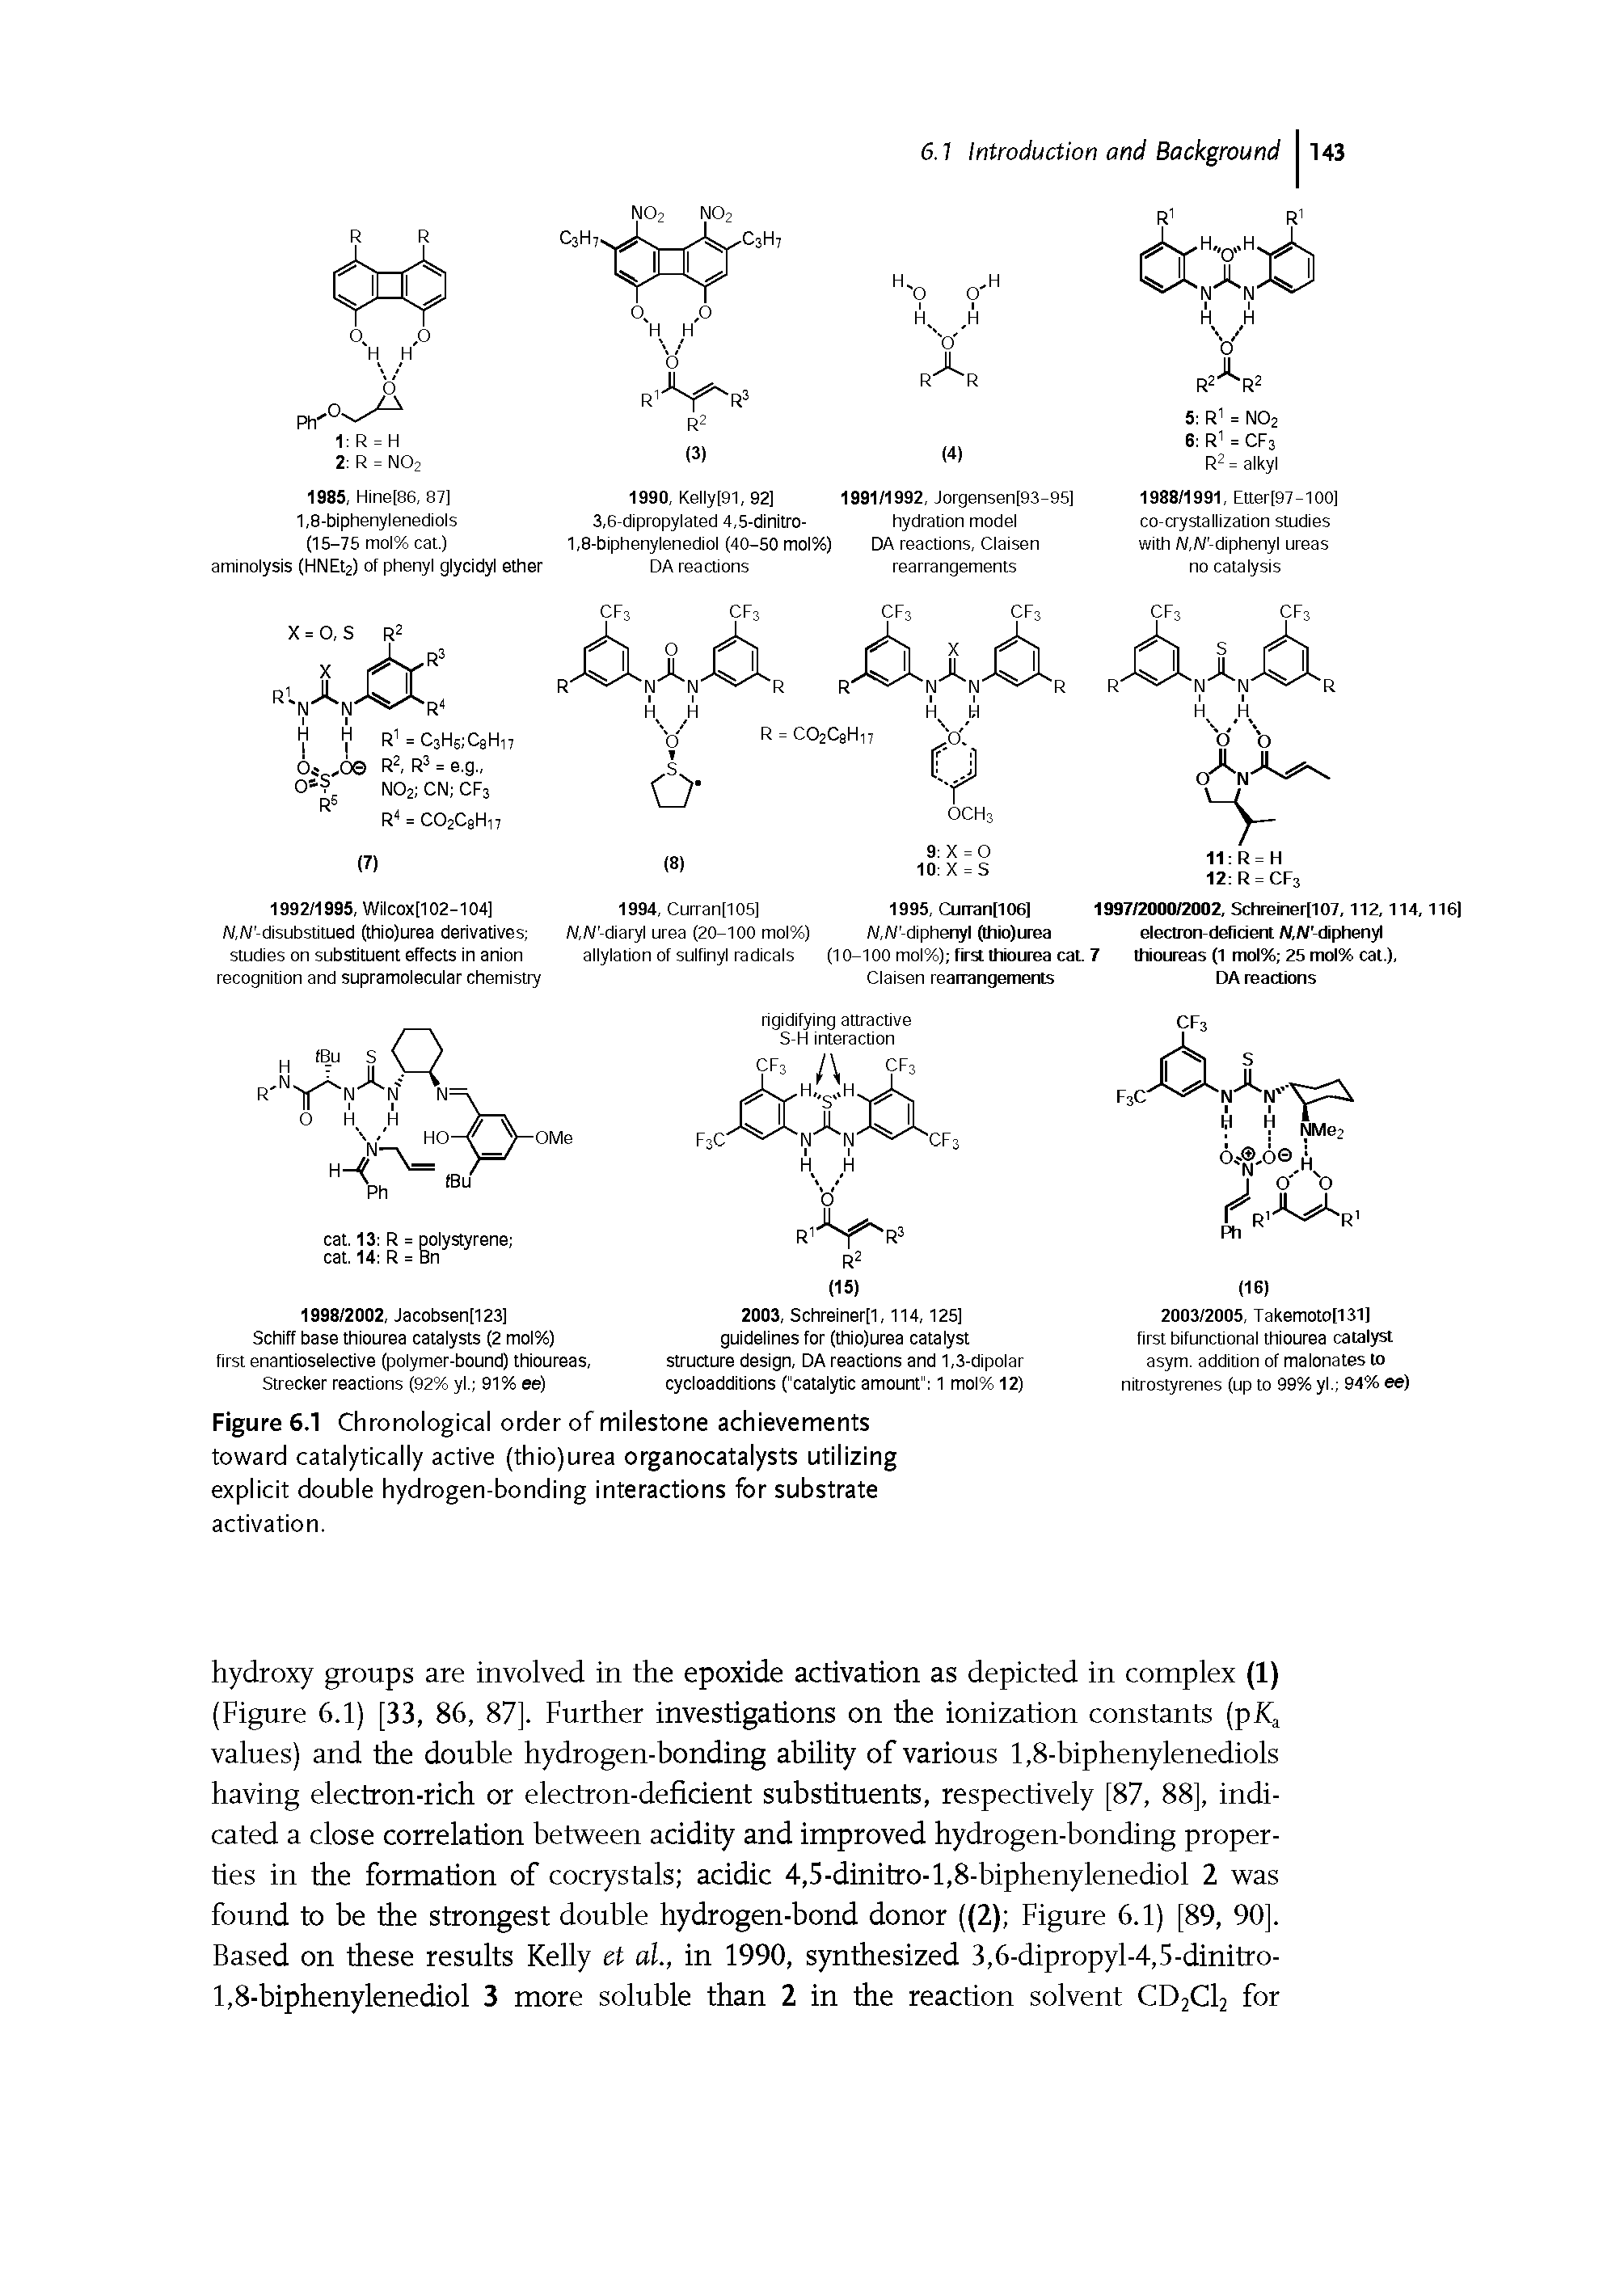 Figure 6.1 Chronological order of milestone achievements toward catalytically active (thio)urea organocatalysts utilizing explicit double hydrogen-bonding interactions for substrate activation.